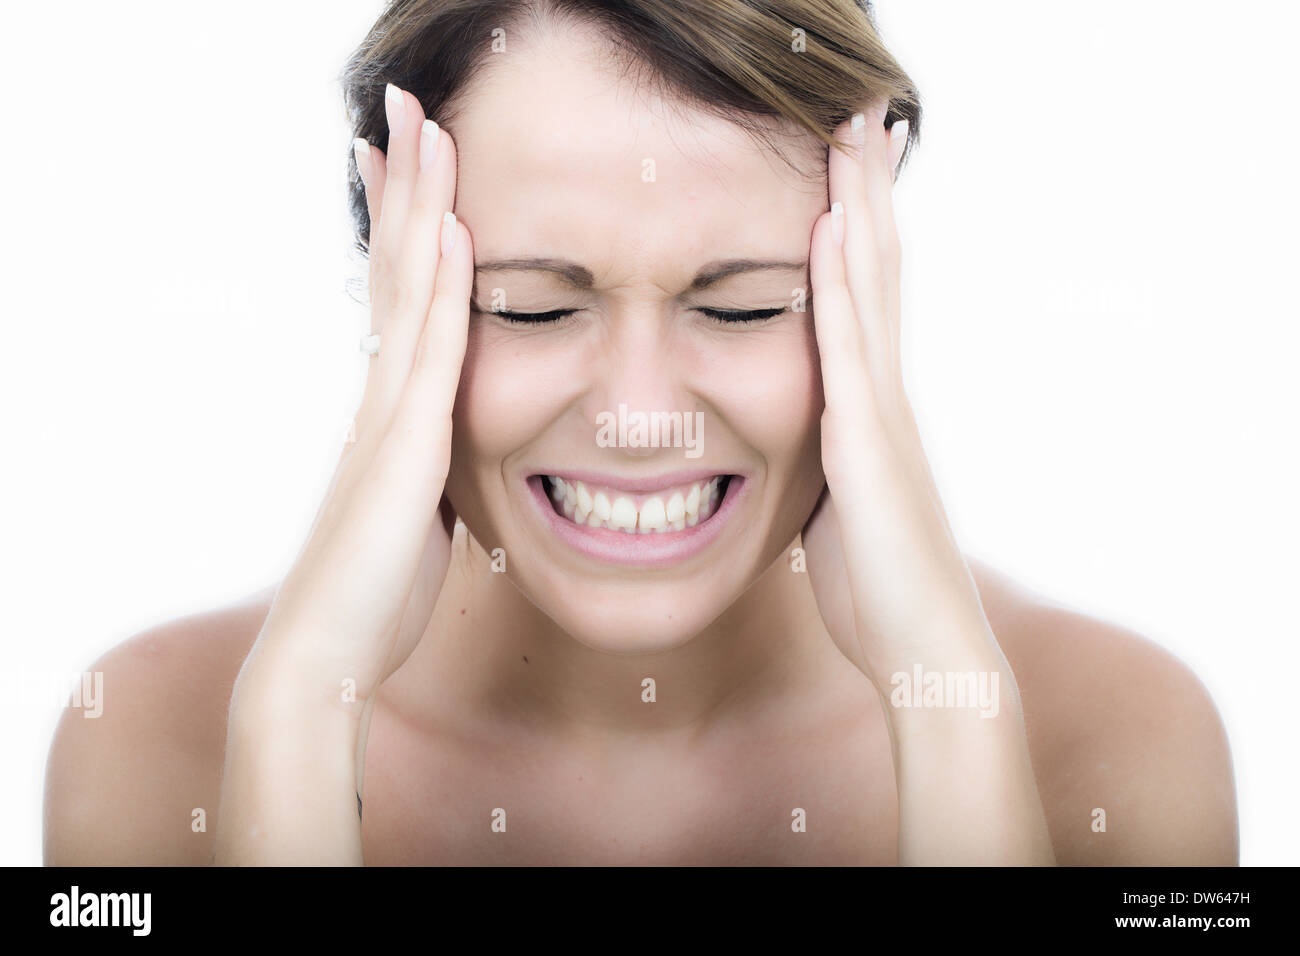 Attractive Angry Tense Young Woman Stock Photo